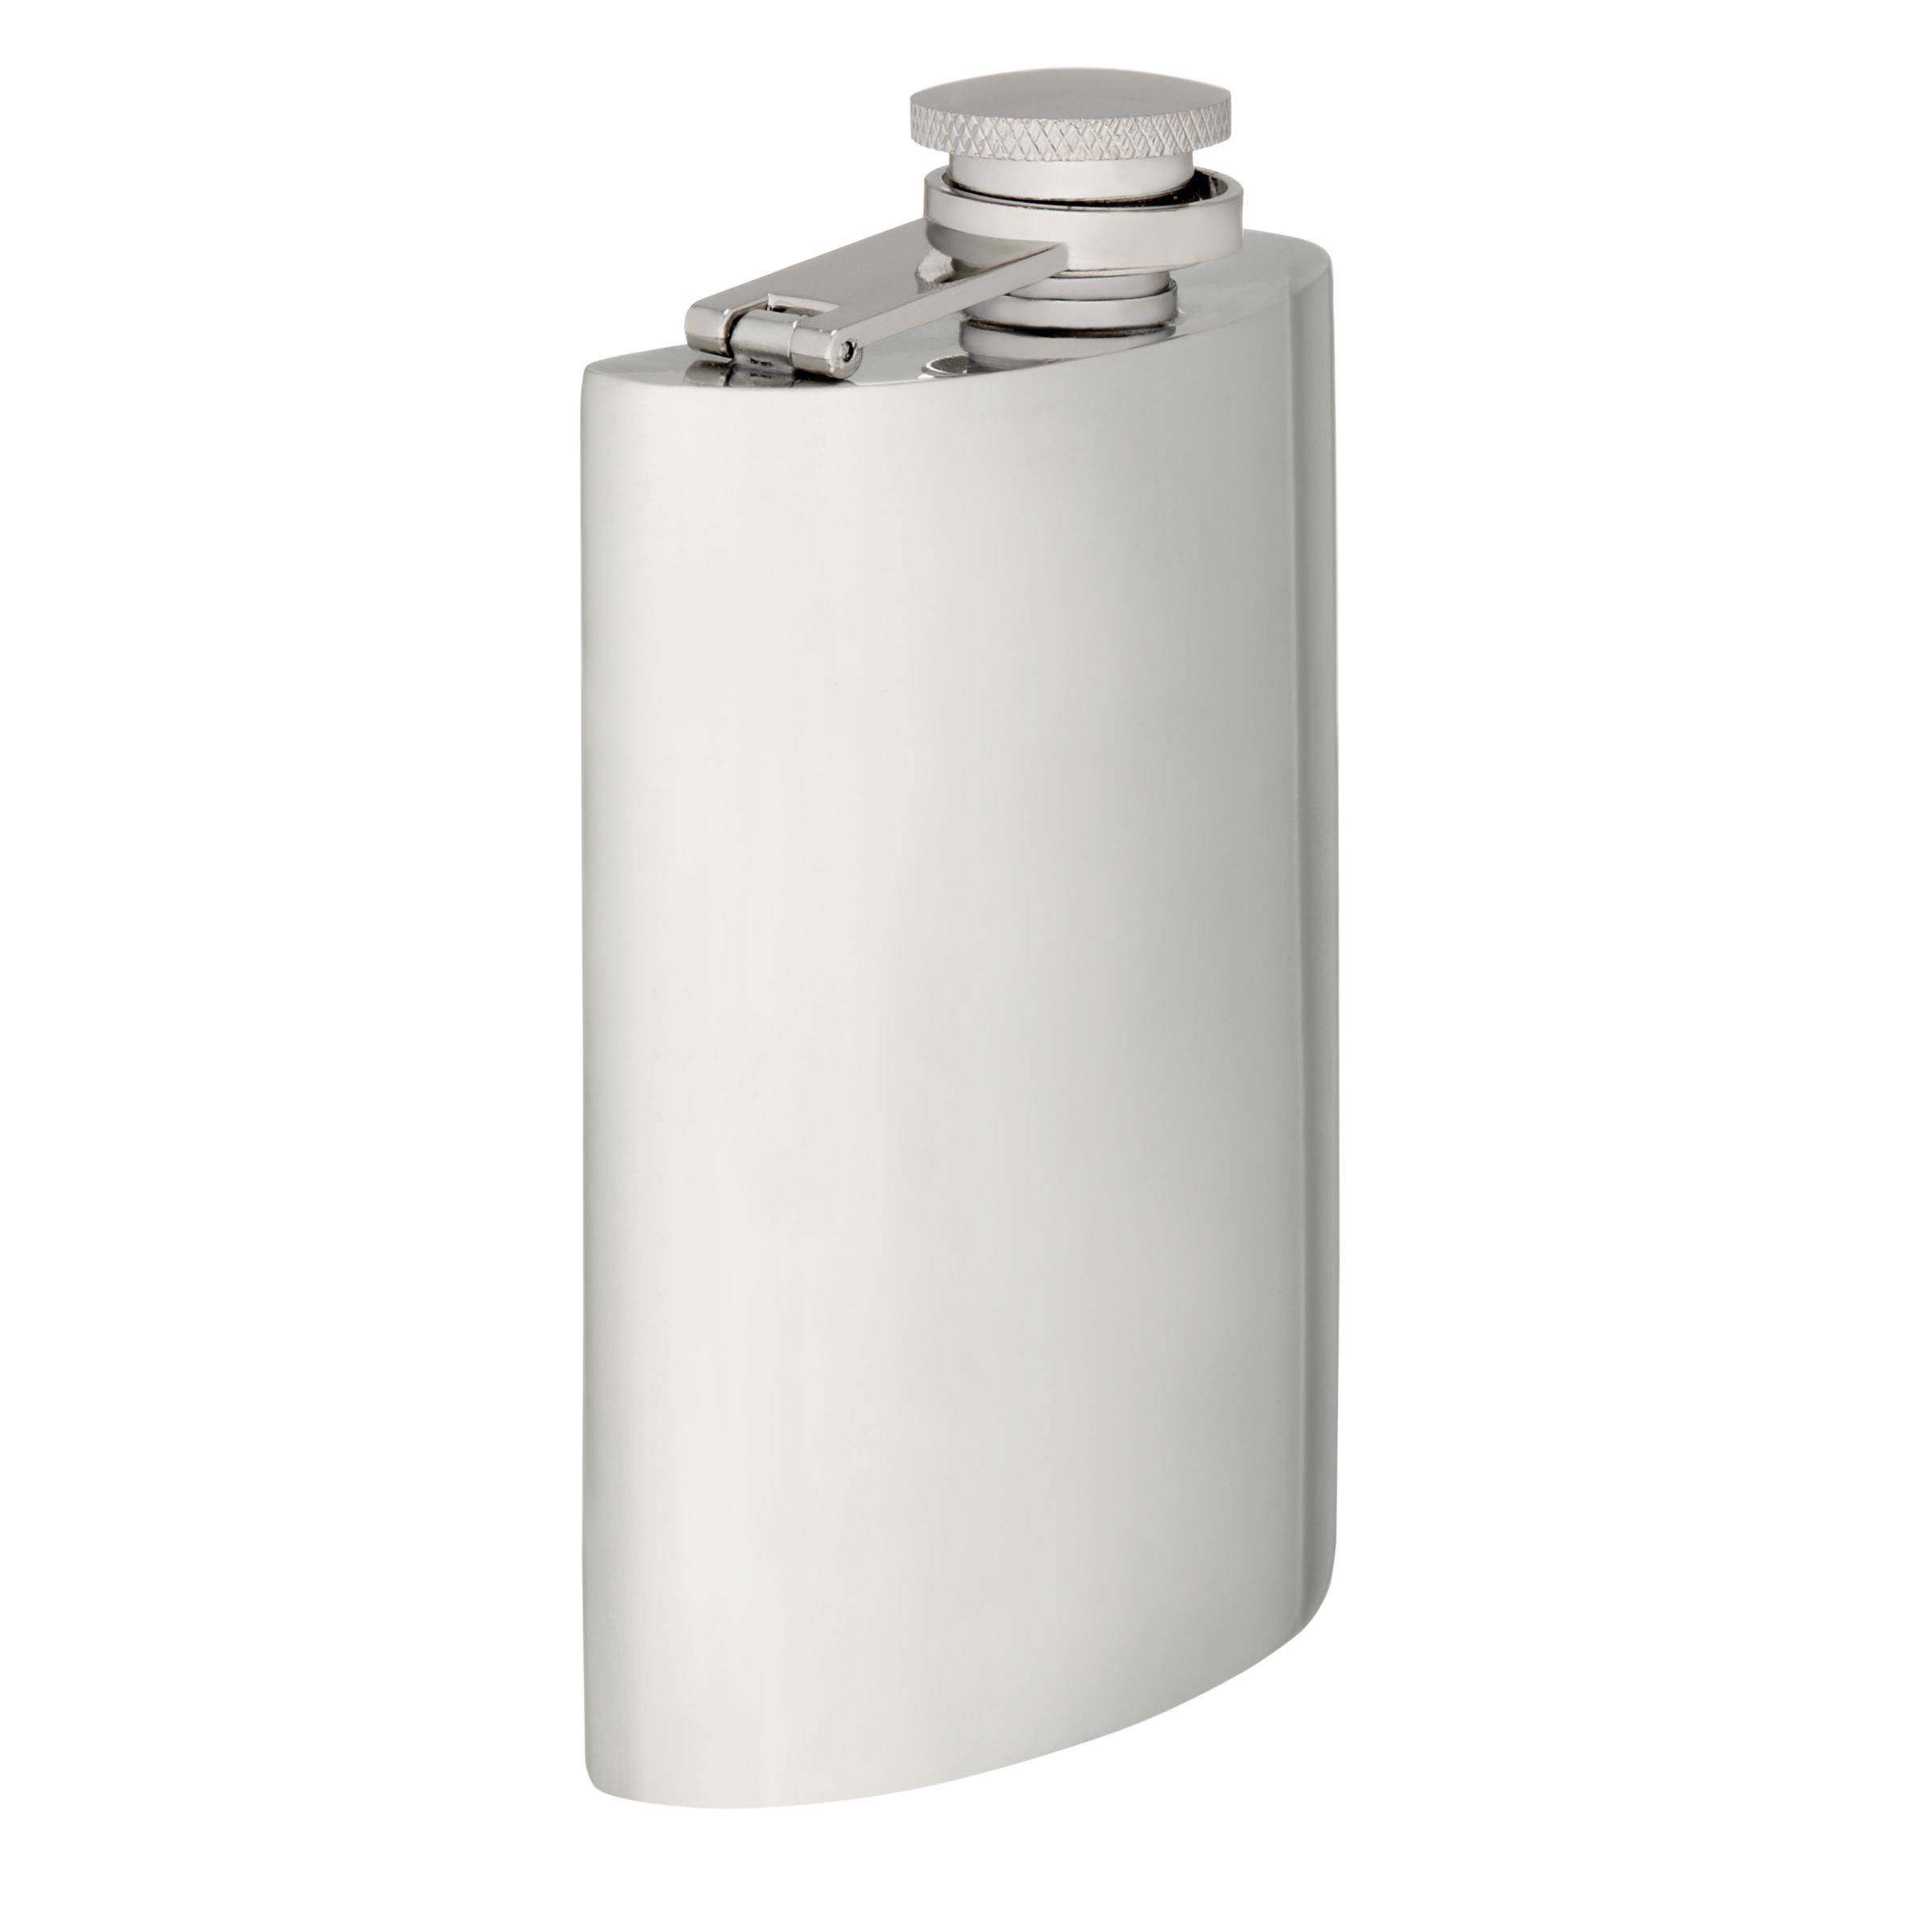 Edwin Blyde and Co. Ltd Pewter Hip Flask 170398